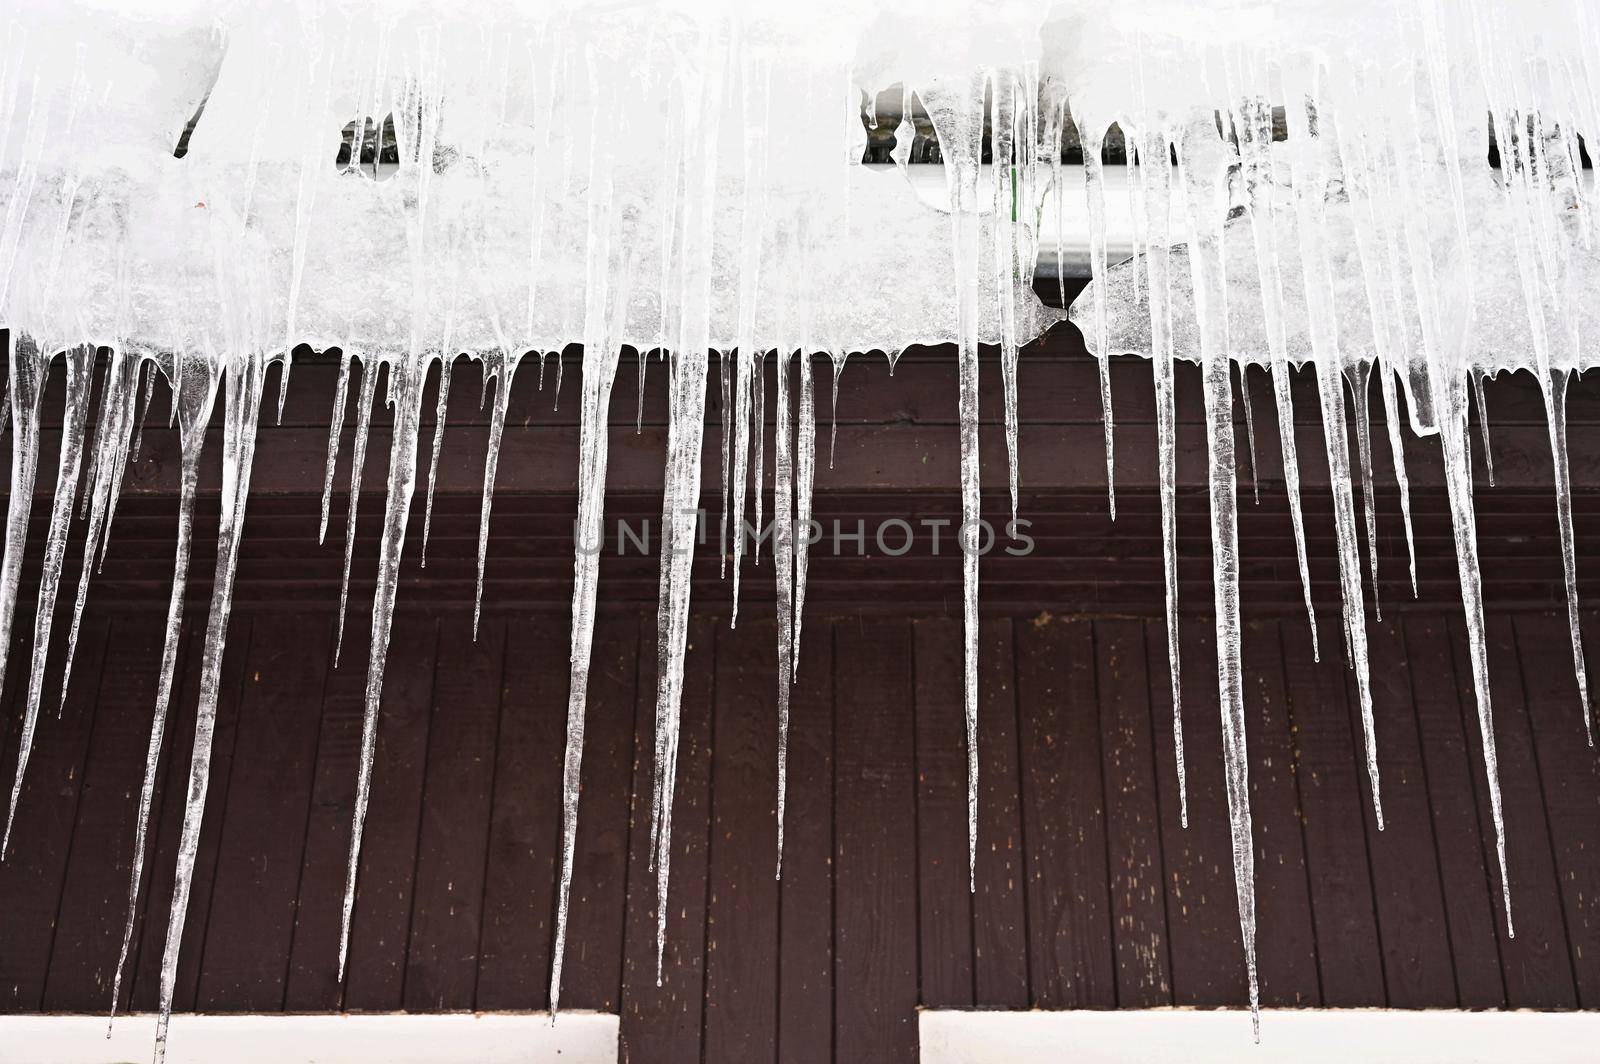 Beautiful icicles hanging from the house roof in winter. Concept for winter and frost.